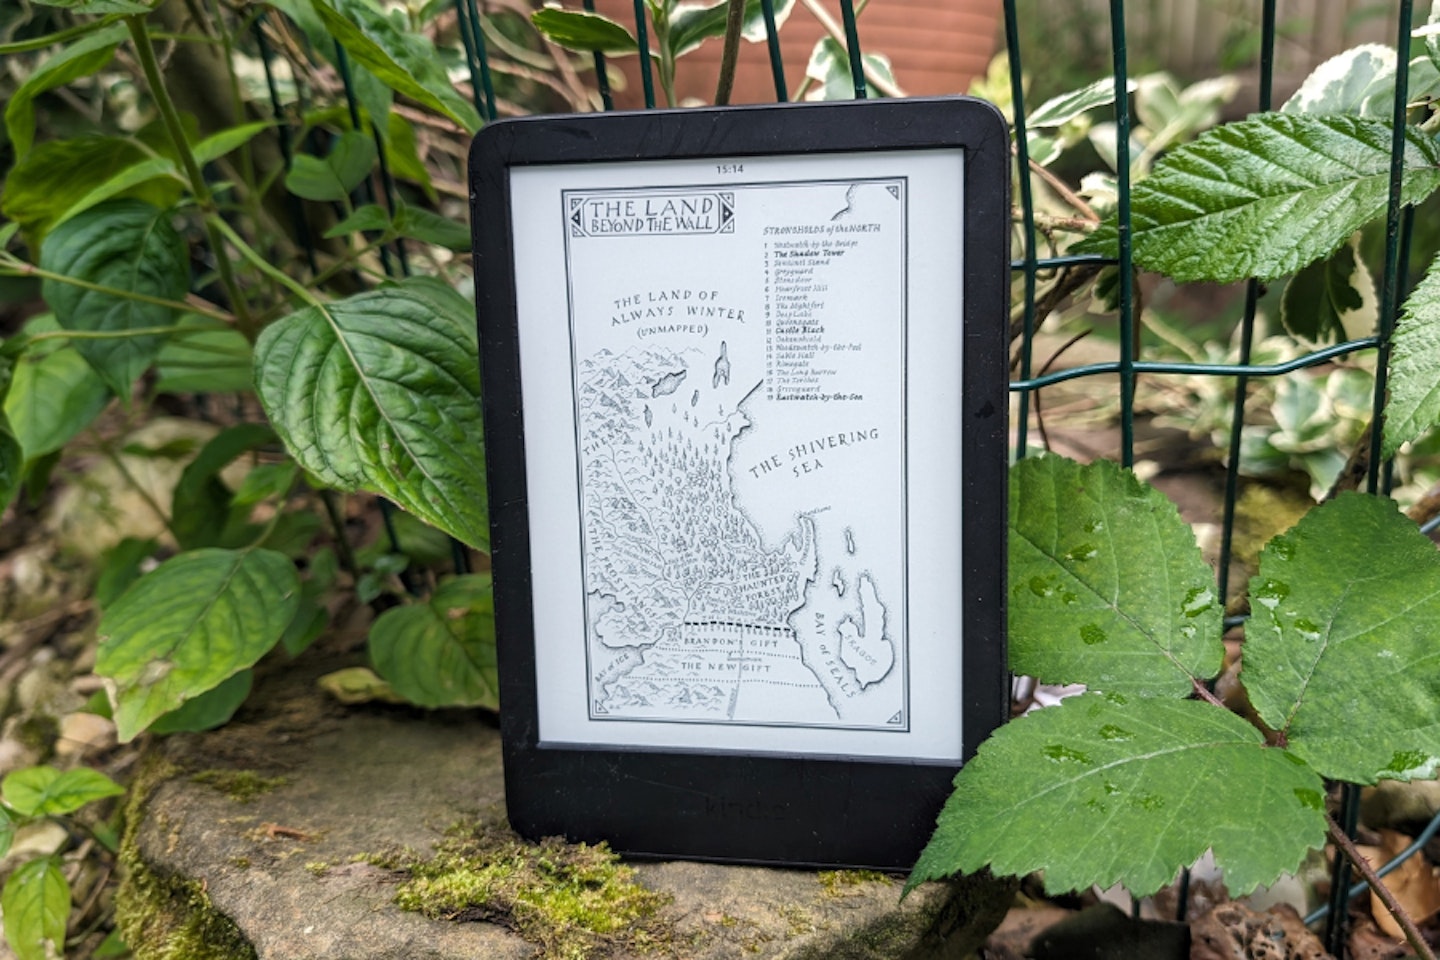 Kindle Game of Thrones reading experience